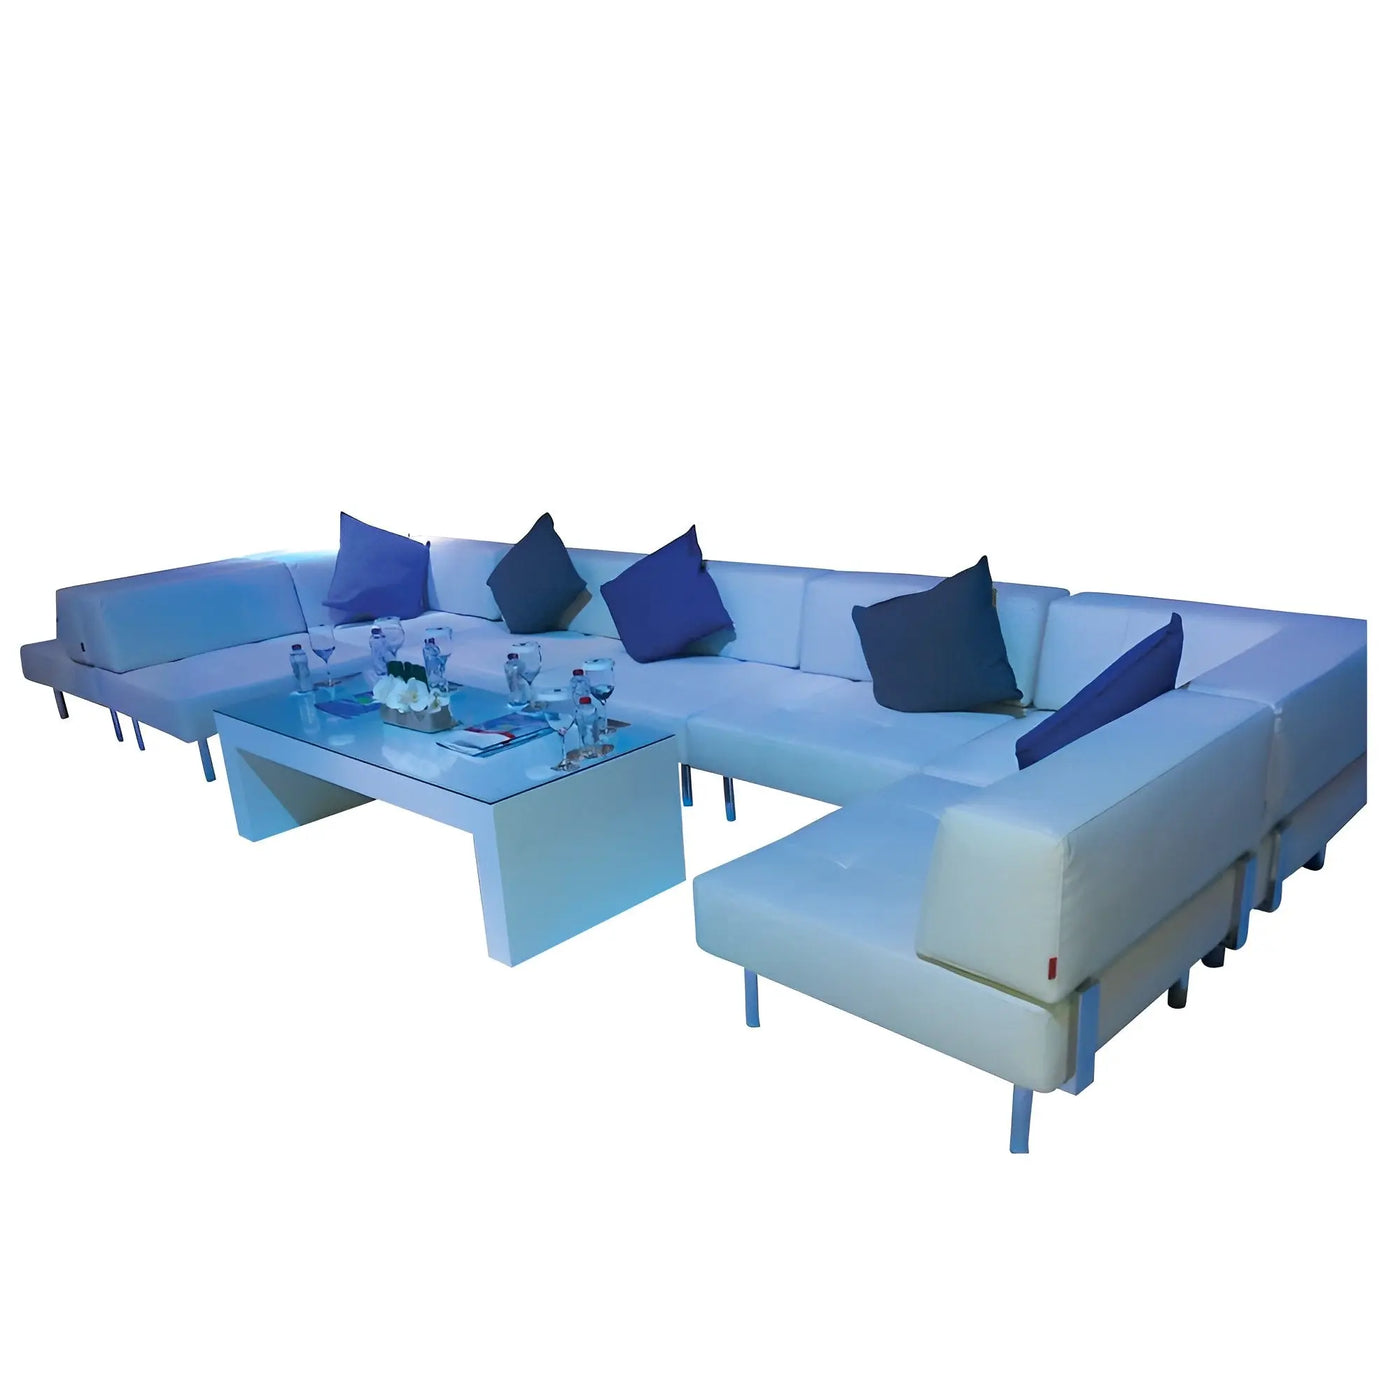 Endless 7 seater square xlarge U-shaped sofa with back and arm rests DesertRiver.rentals